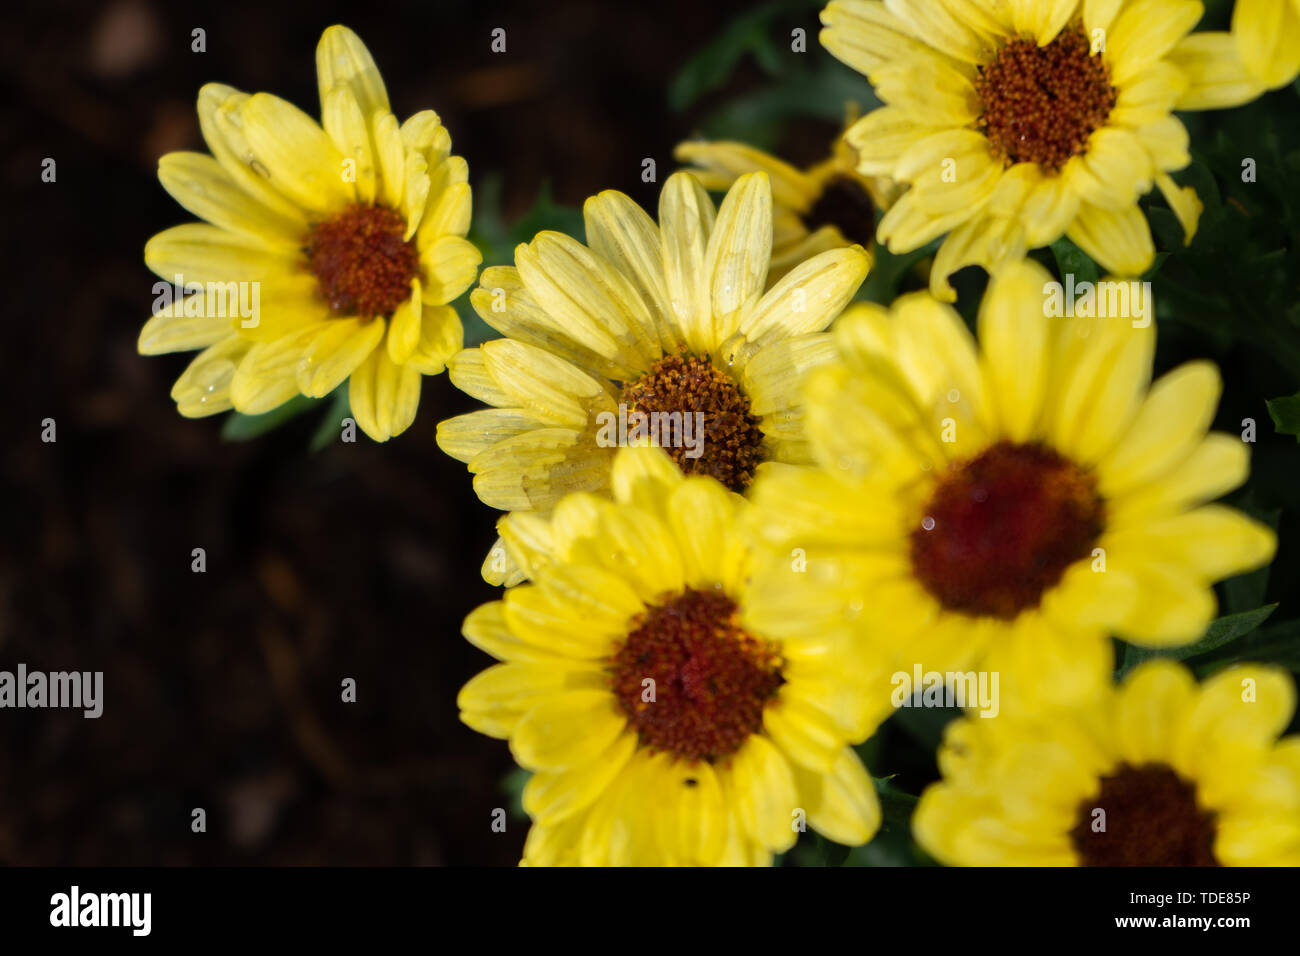 The flower is a small shrub 30-120 cm tall. The flowers are single flowers. The flowers are yellow. In the center of the flower is reddish brown. Stock Photo